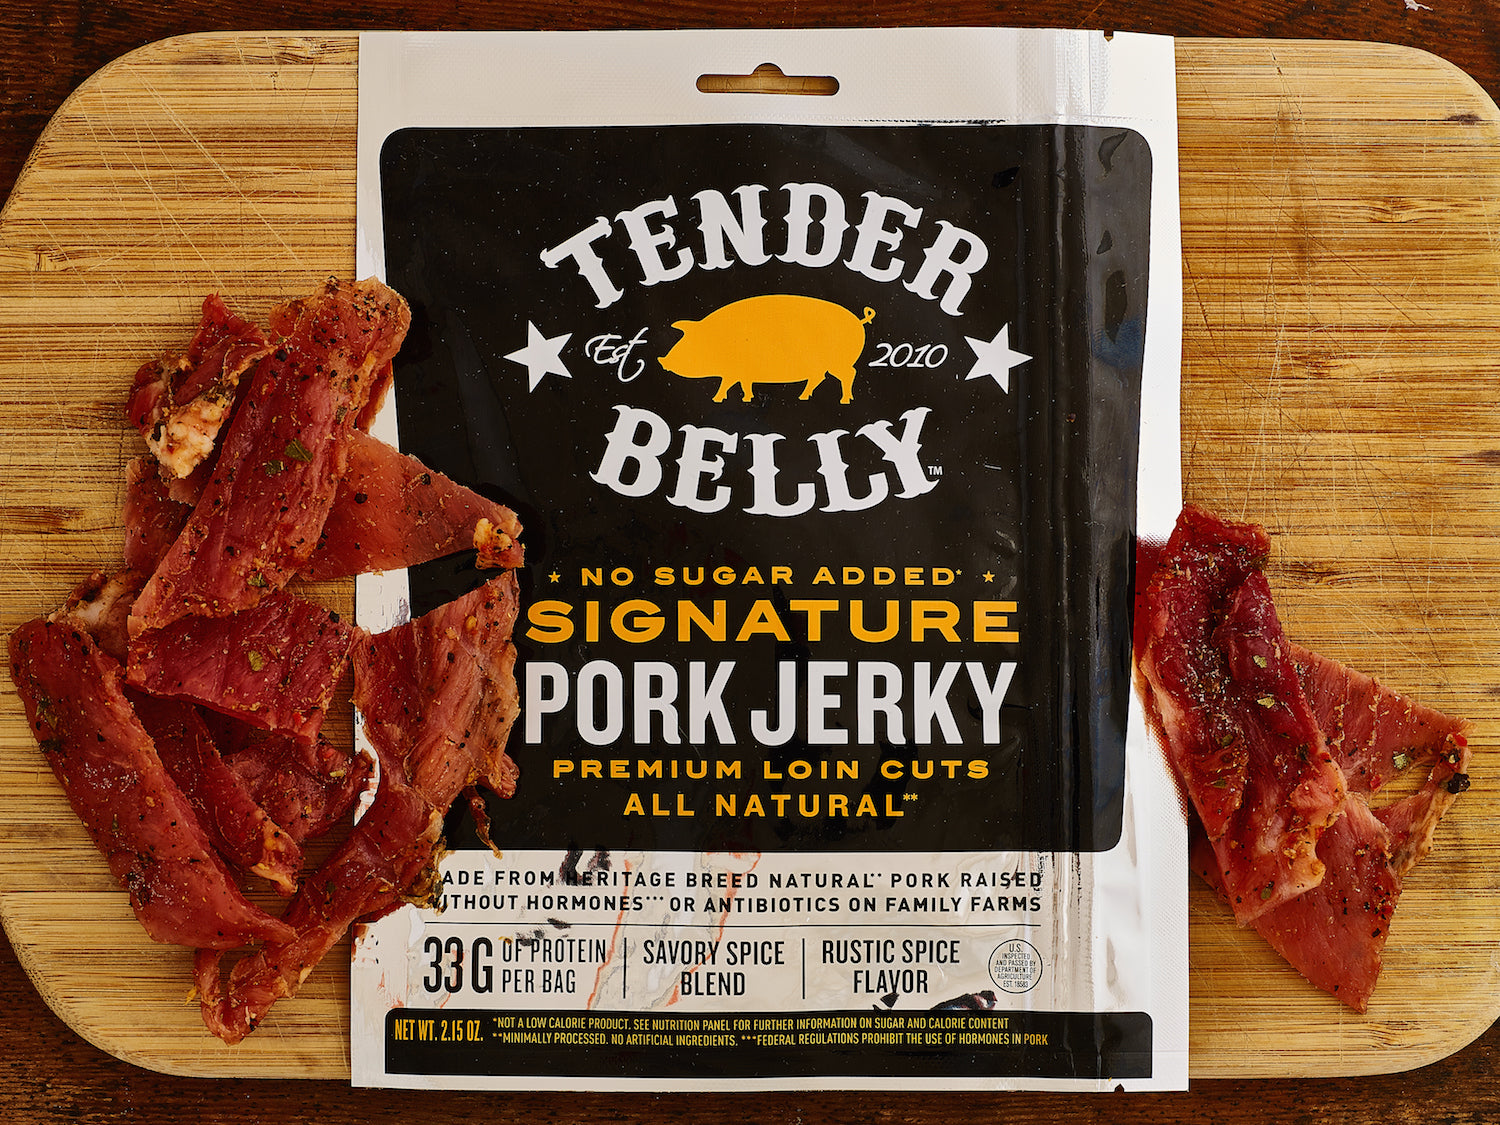 Here's where you can find Tender Belly in Colorado this month